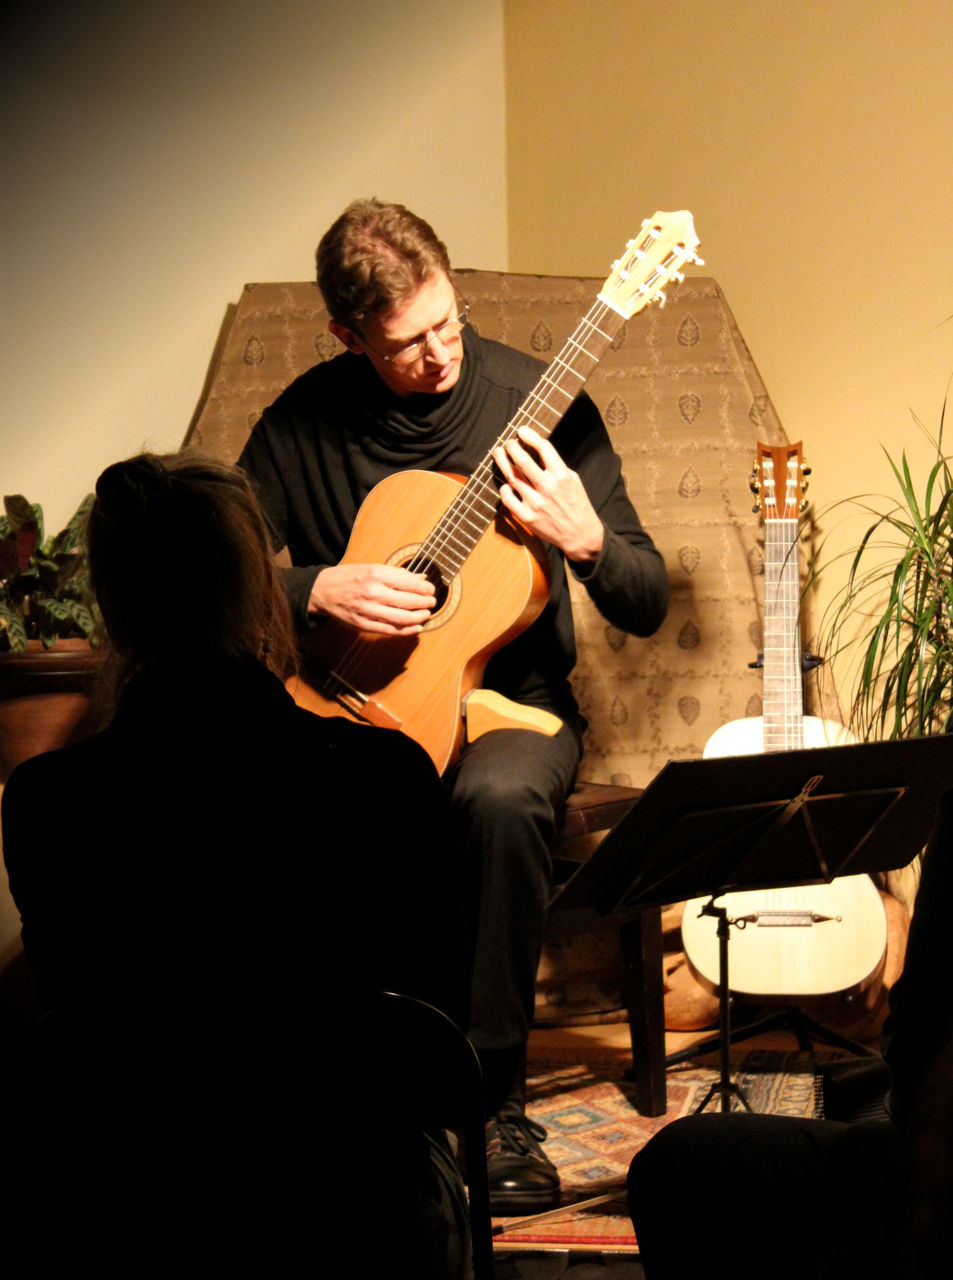 Bruce Paine playing a Rod Capper 'Prelude' student guitar